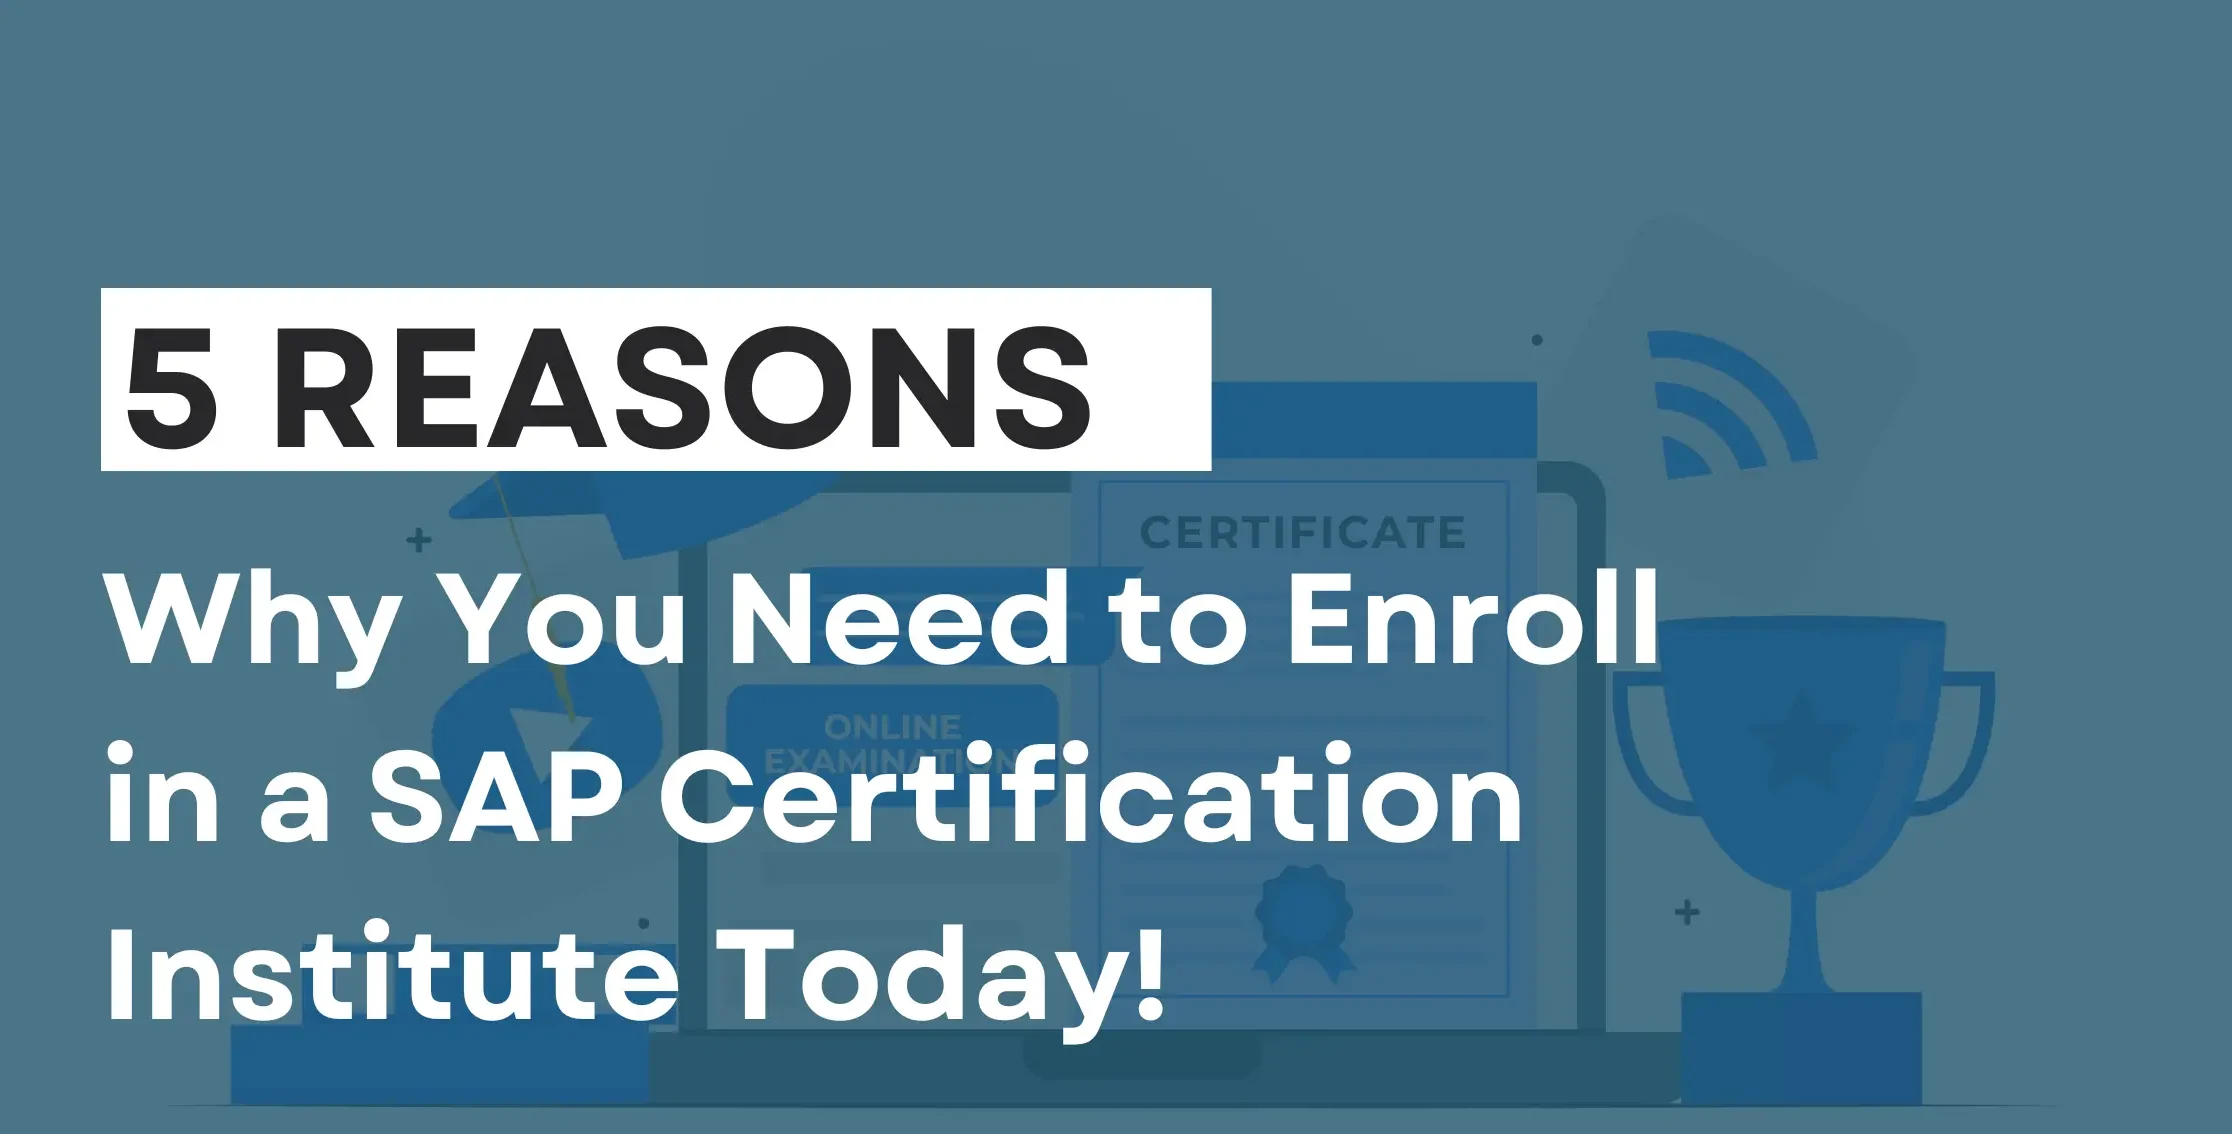 Enroll-in-a-SAP-Certification-Institute-Today